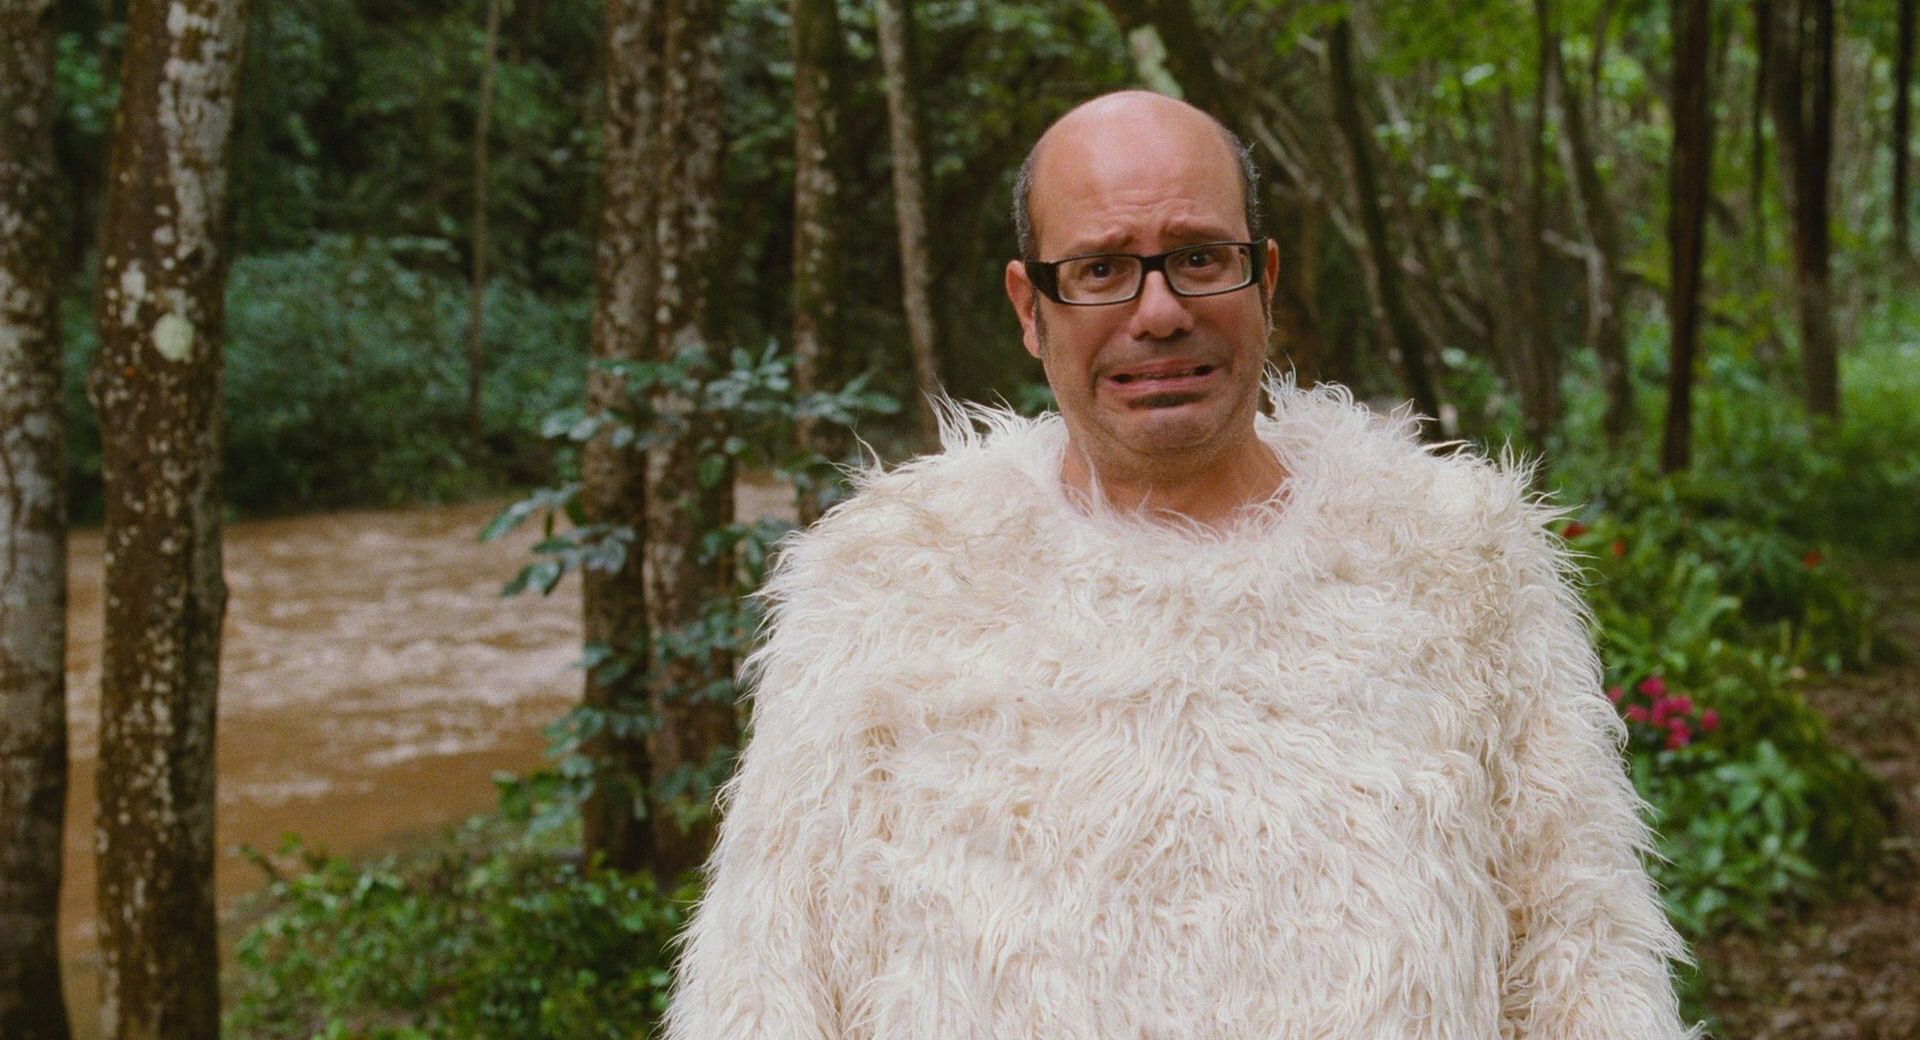 'An Ugly Reminder': David Cross Reveals Why New Series With Bob Odenkirk Was Scrapped